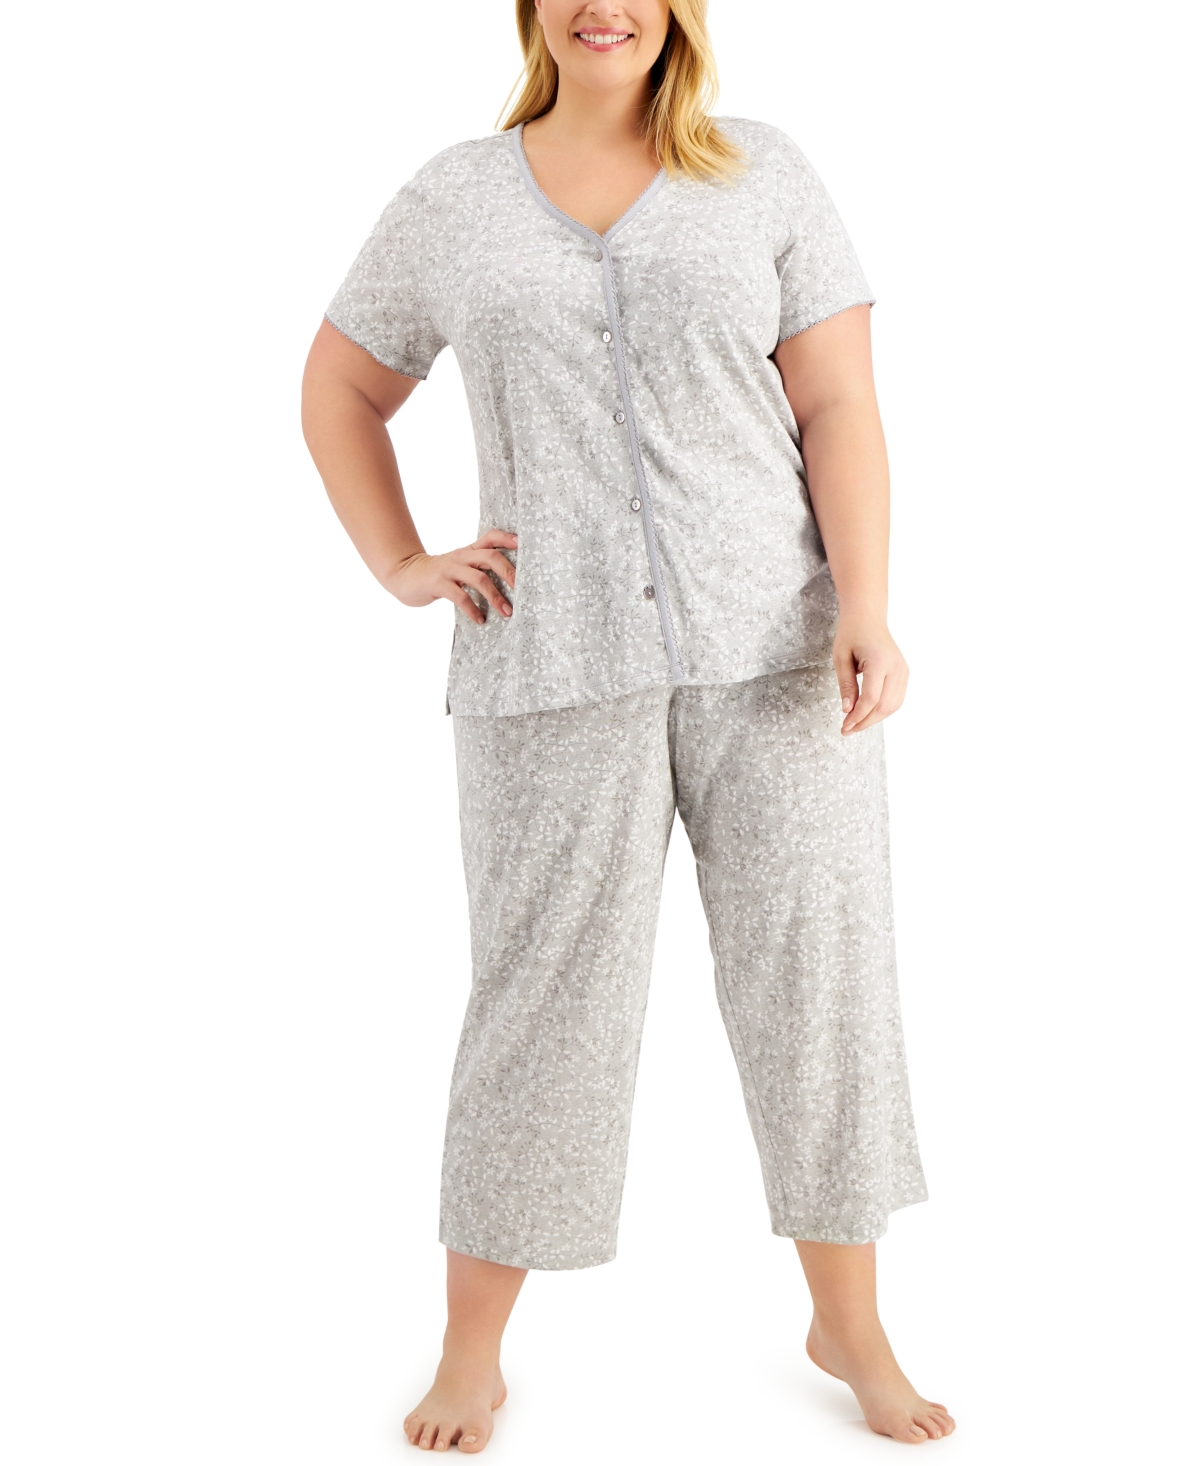 Charter Club The Everyday Cotton Plus Size Capri Pajamas Set, Created for Macy's